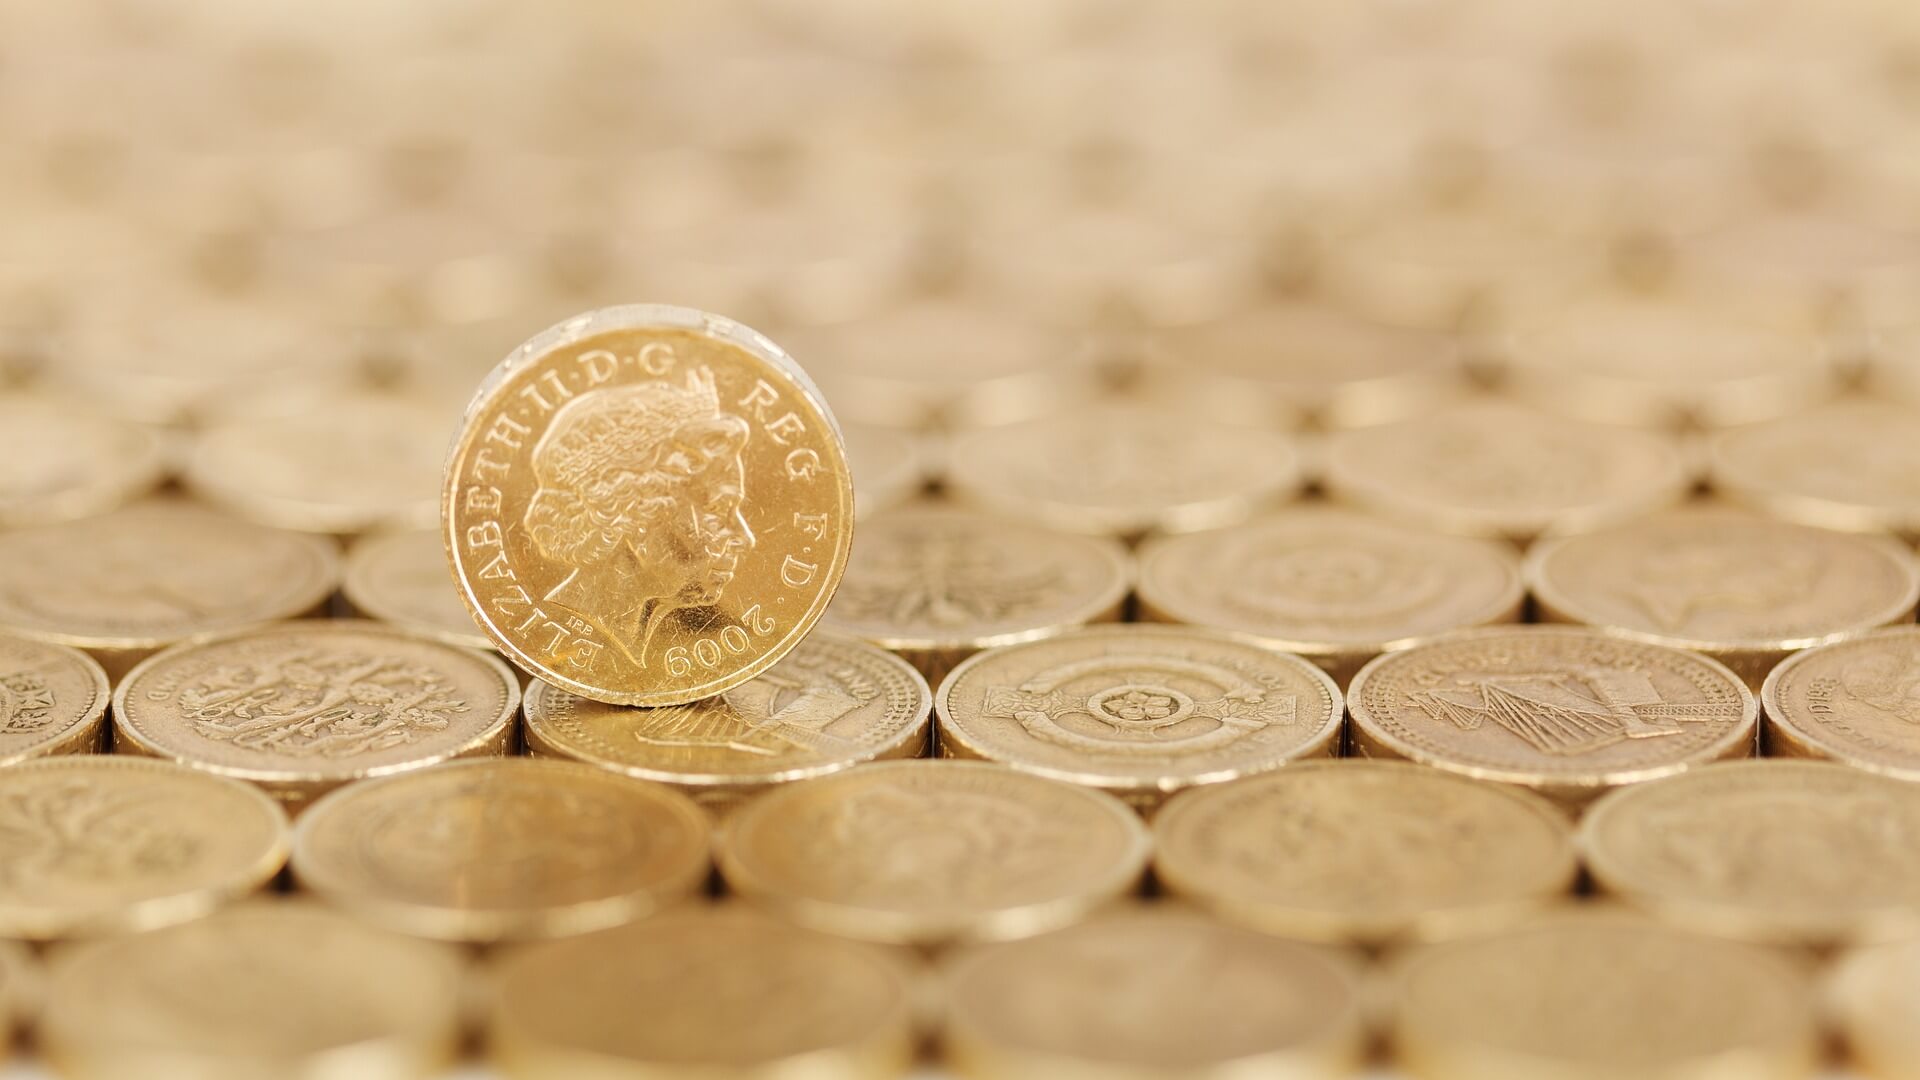 A surface of pound coins with a single coin standing vertically upon it, head side facing towards you